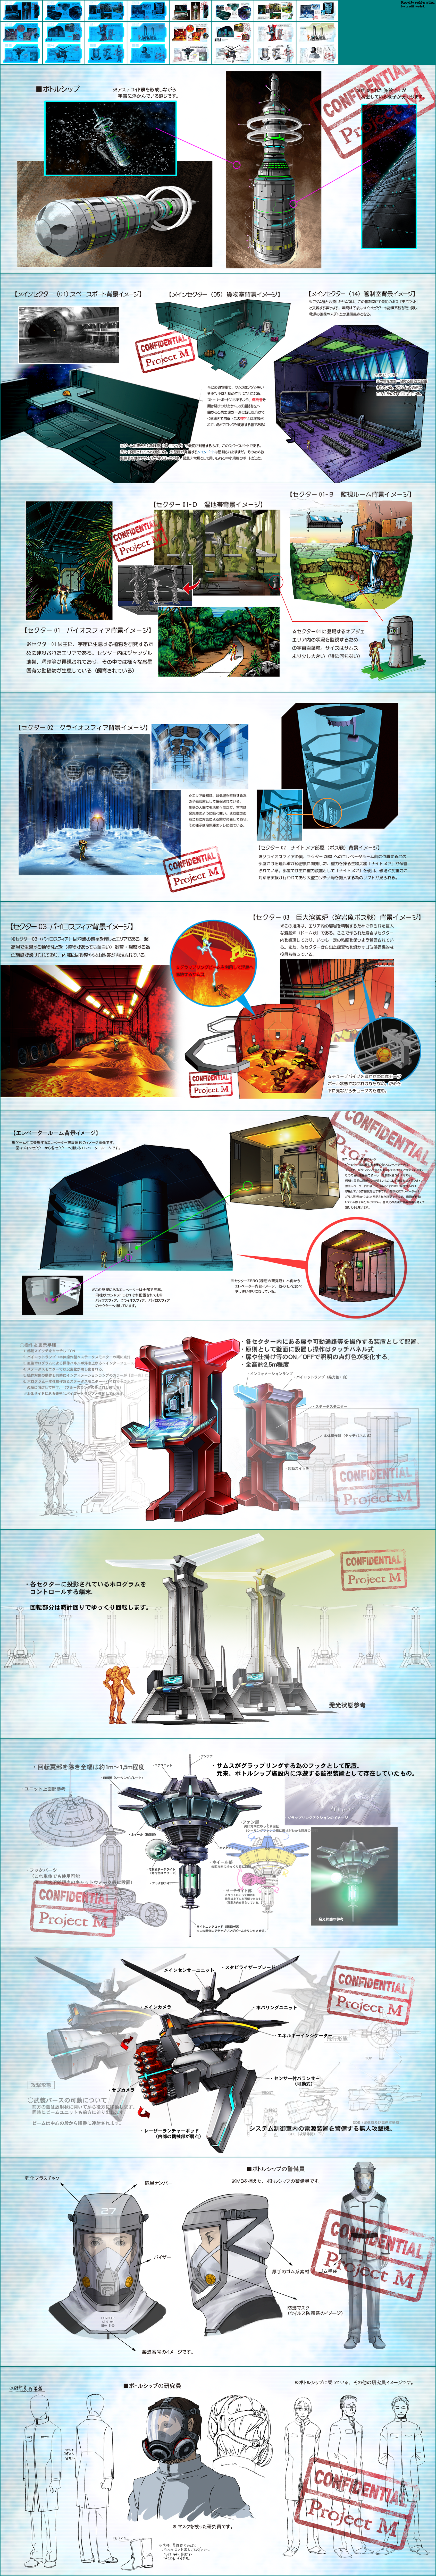 Metroid: Other M - Gallery (Page 3)